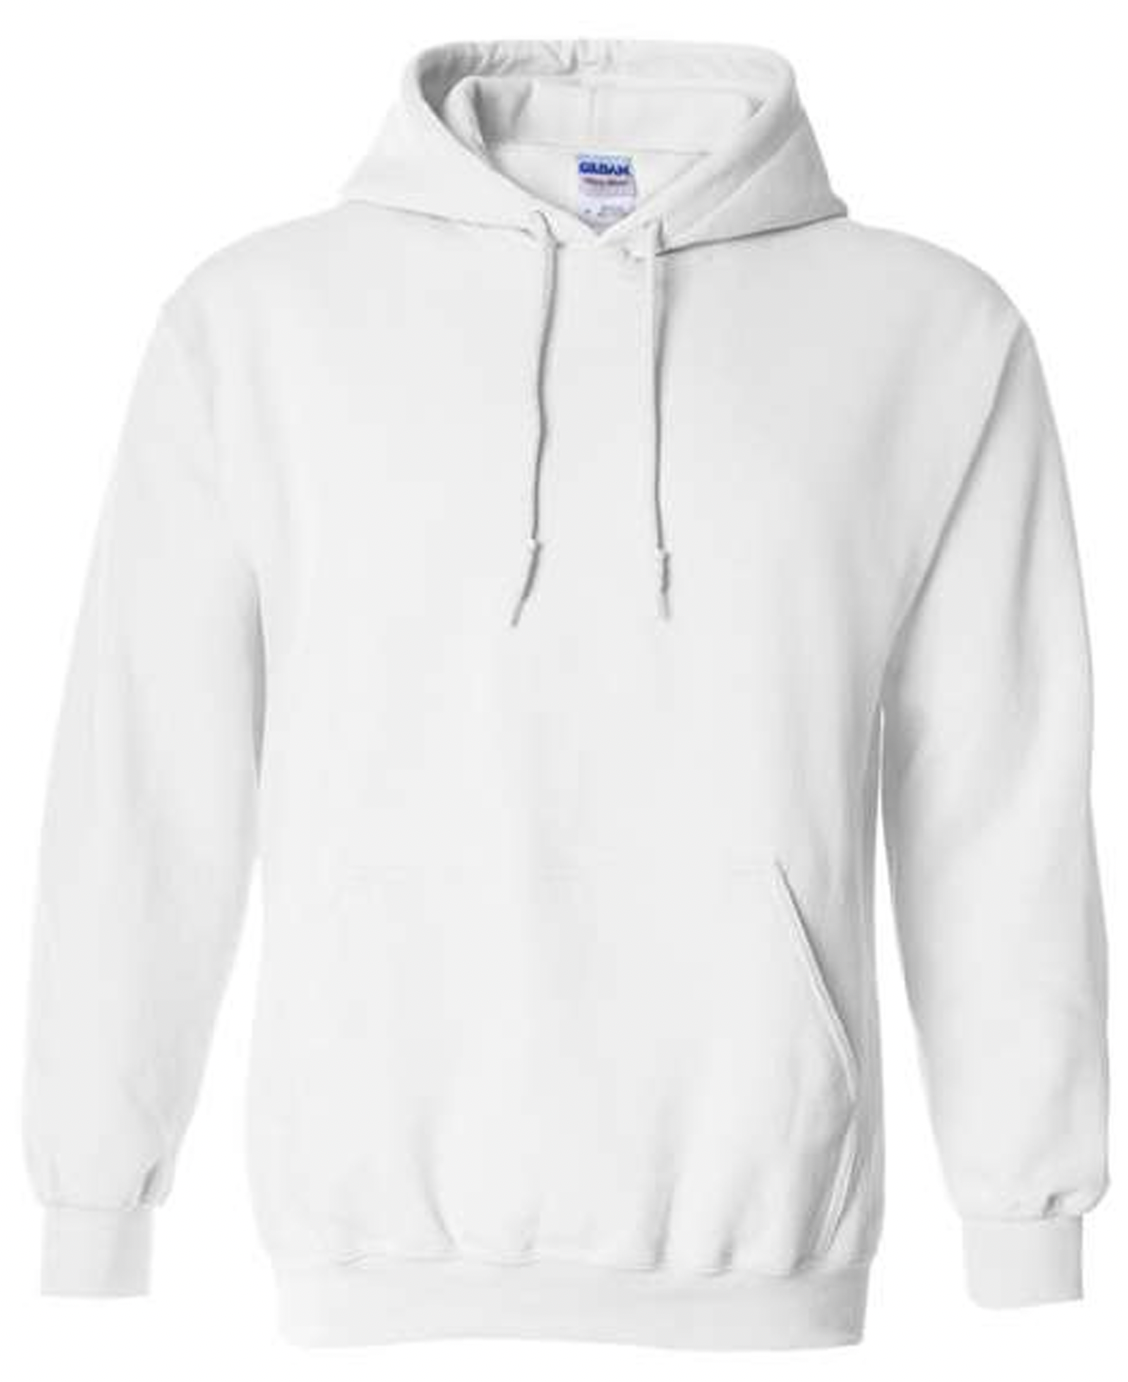 Left Chest Logo - Mary Hill - Integrated Services Hoodies